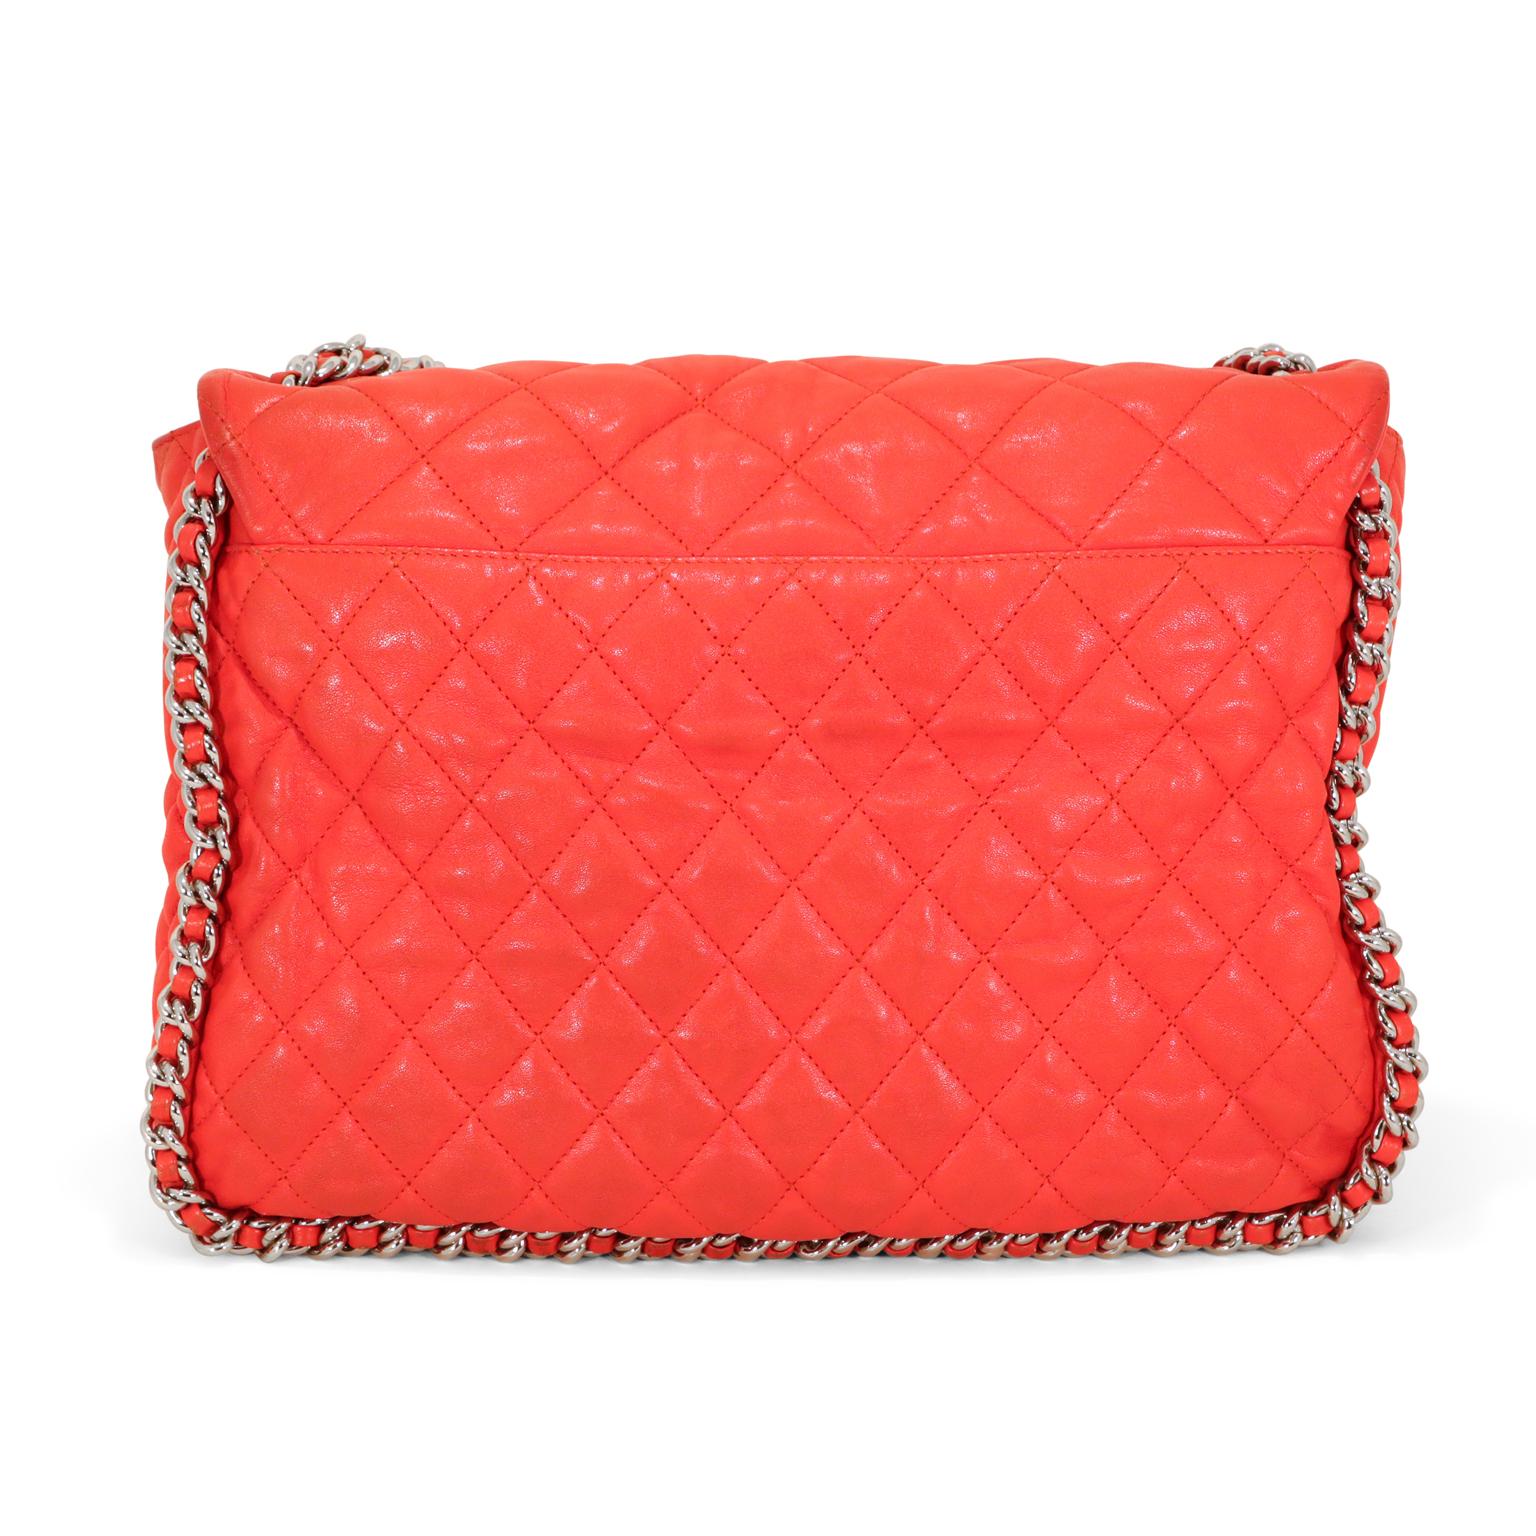 This authentic Chanel Red Lambskin Chain Around Maxi is in very good condition.  It has enjoyed a previous life and therefore may have minor imperfections.
Vibrant red washed lambskin is quilted in signature Chanel diamond pattern.  Silver